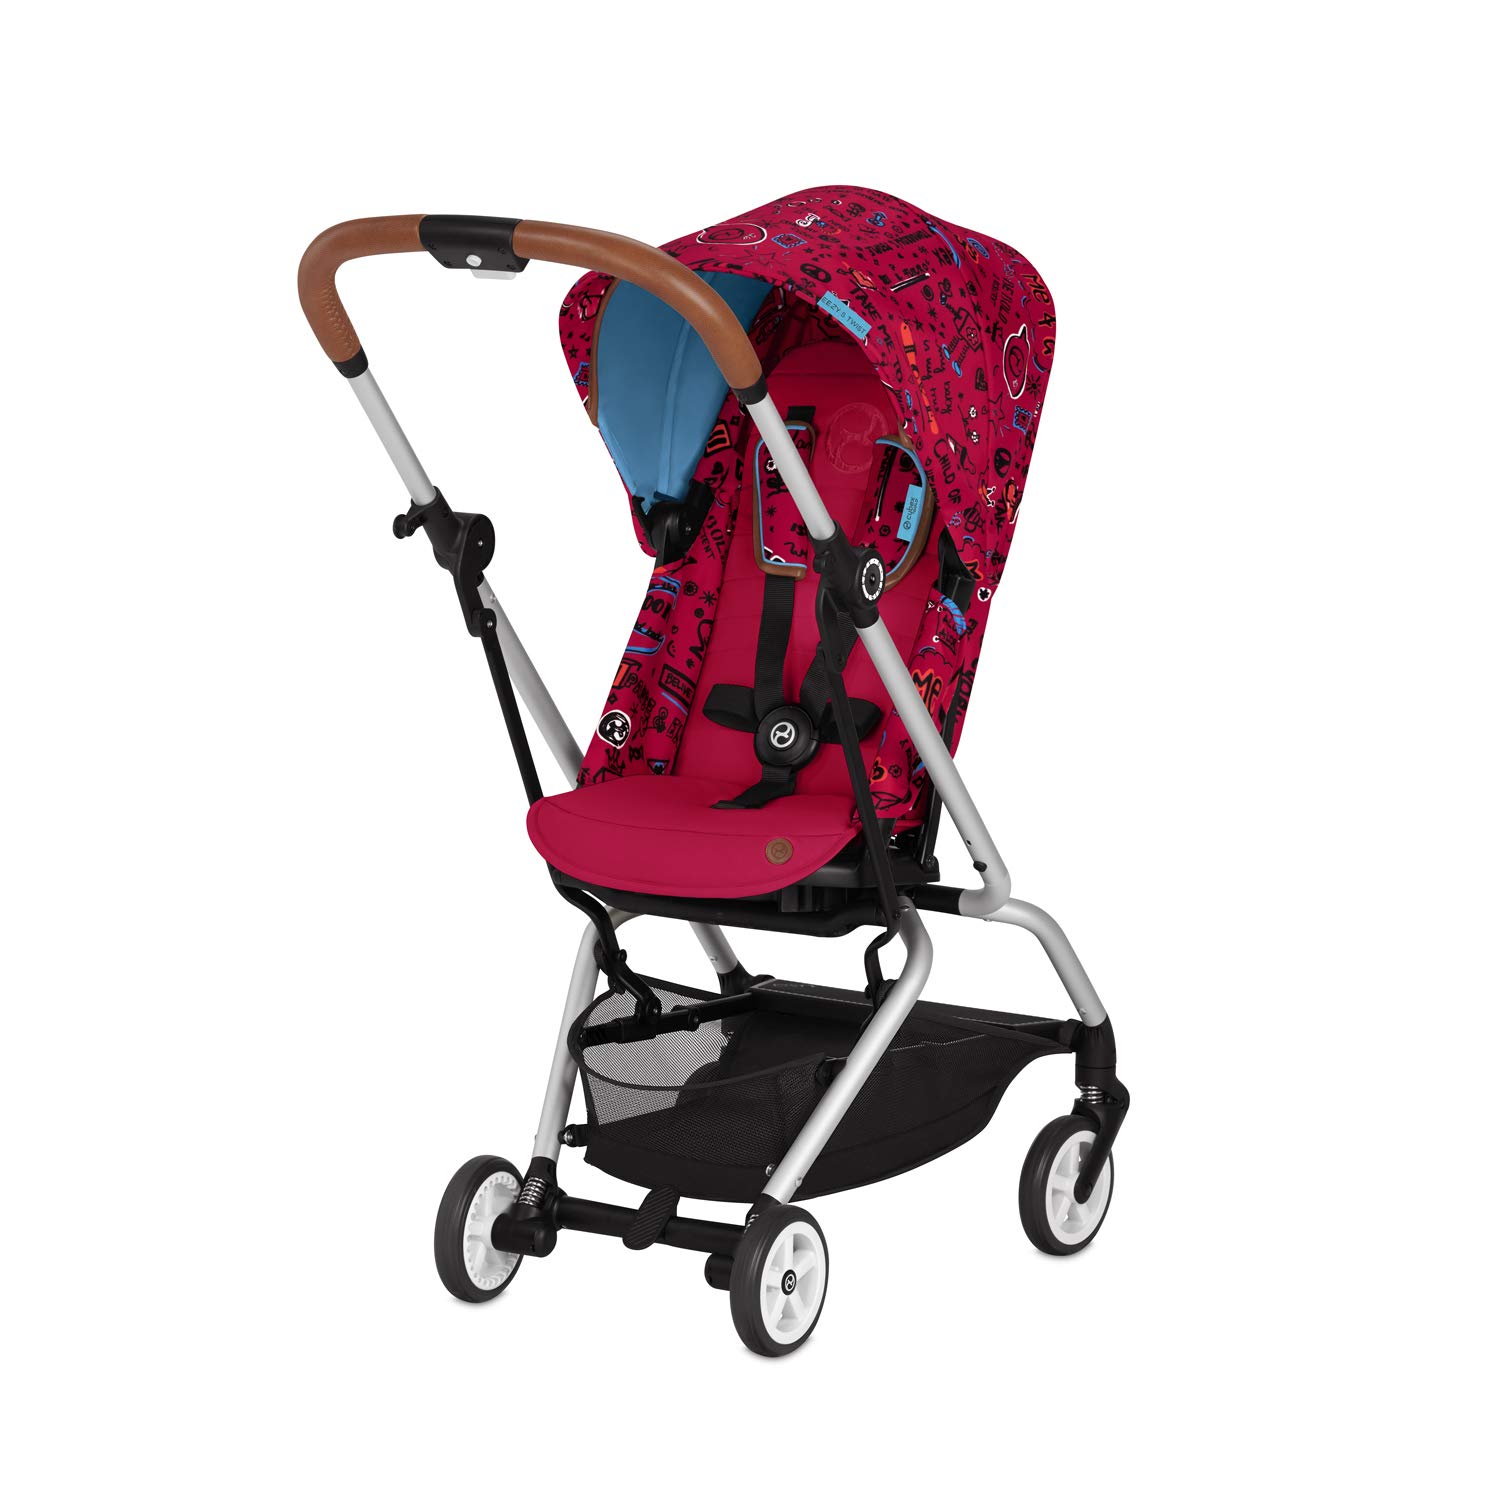 CYBEX Gold Eezy S Twist Buggy 360° Rotating Seat Unit, Ultra Compact, From Birth to 17 kg (Approx. 4 Years), Love